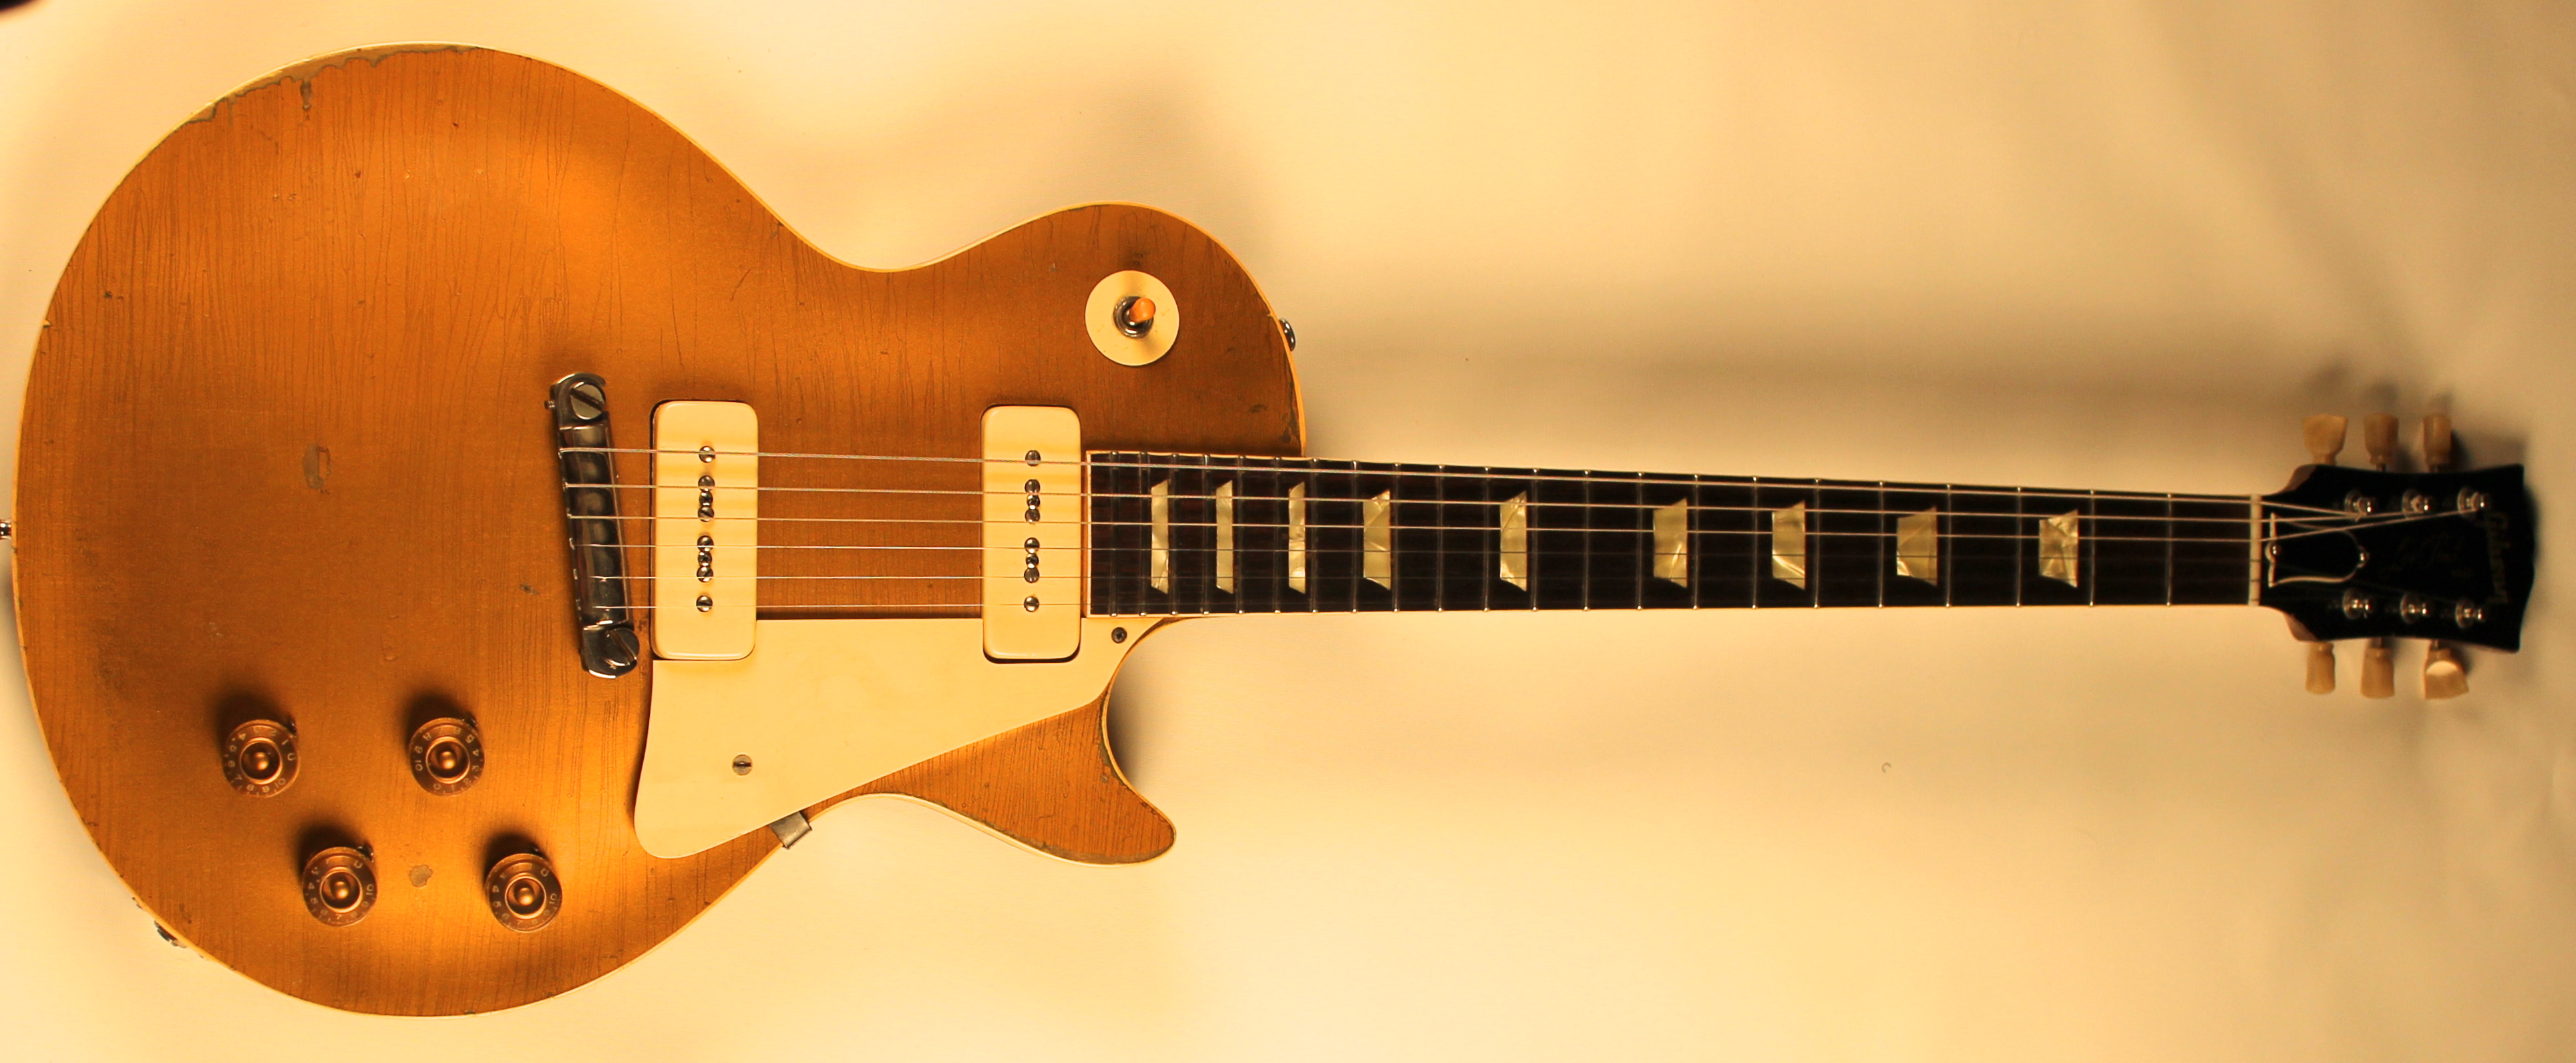 Free Gibson Les Paul Gold Top Stock Photo - FreeImages.com